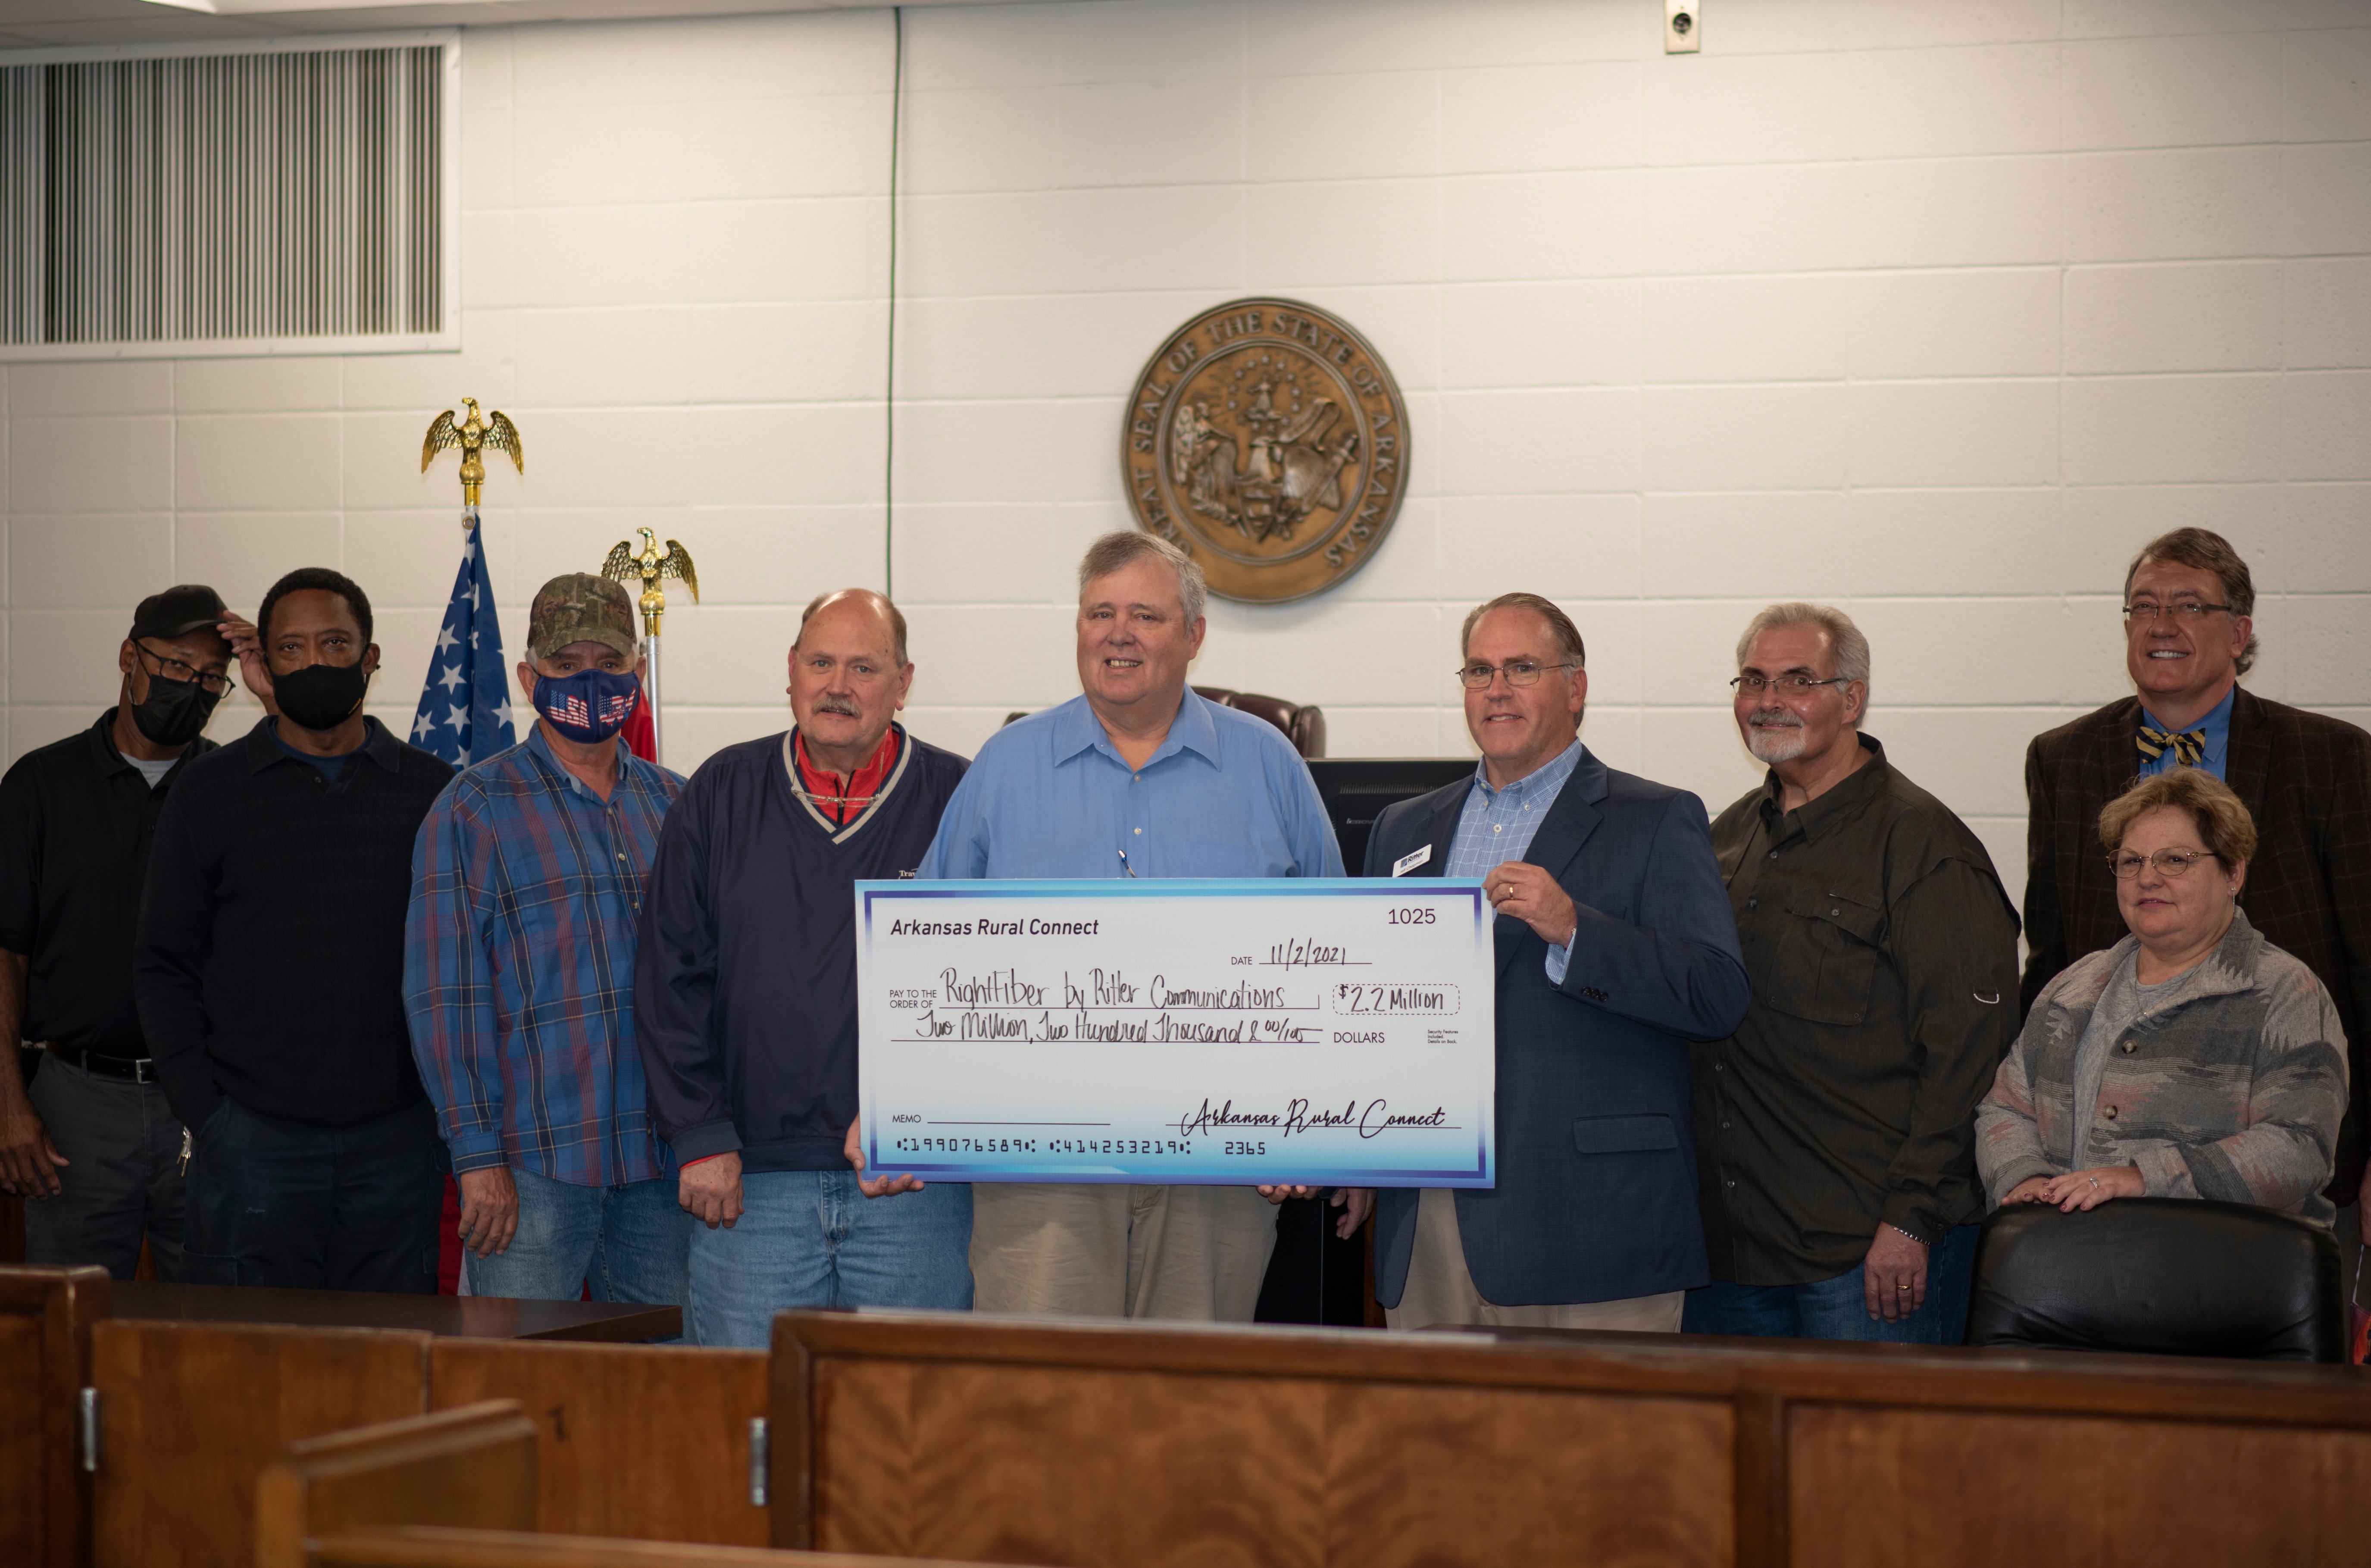 Pictured: Members of the Brinkley City Council join Ritter Communications in accepting a $2.2 million investment through the Arkansas Rural Connect (ARC) grant program to extend Ritter Communications new fiber optic network to local residents. (L-R): Alderman Michael Tucker, Alderman Eddie Harvey, Alderman Billy Waggle, Alderman Wally Shaw, Brinkley Mayor Gary Hennard, Ritter Communications Vice President & General Manager of RightFiber Jeff Chapman, Alderman Ron Burrow, City Clerk & Treasurer Stacey Roche, and City Attorney Baxter Sharp.